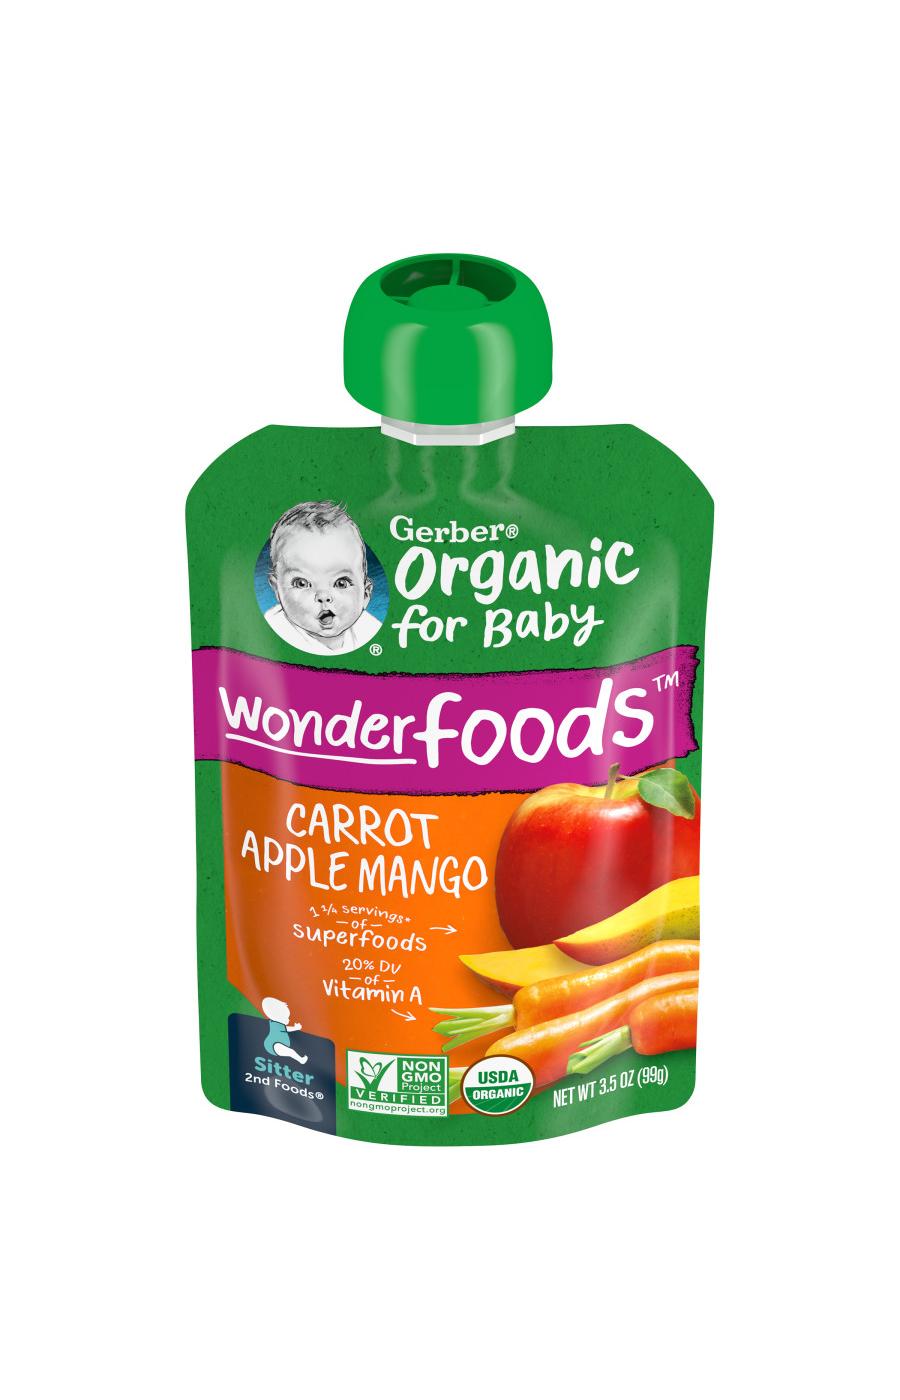 Gerber Organic for Baby Wonderfoods Pouch - Carrot Apple & Mango; image 1 of 8